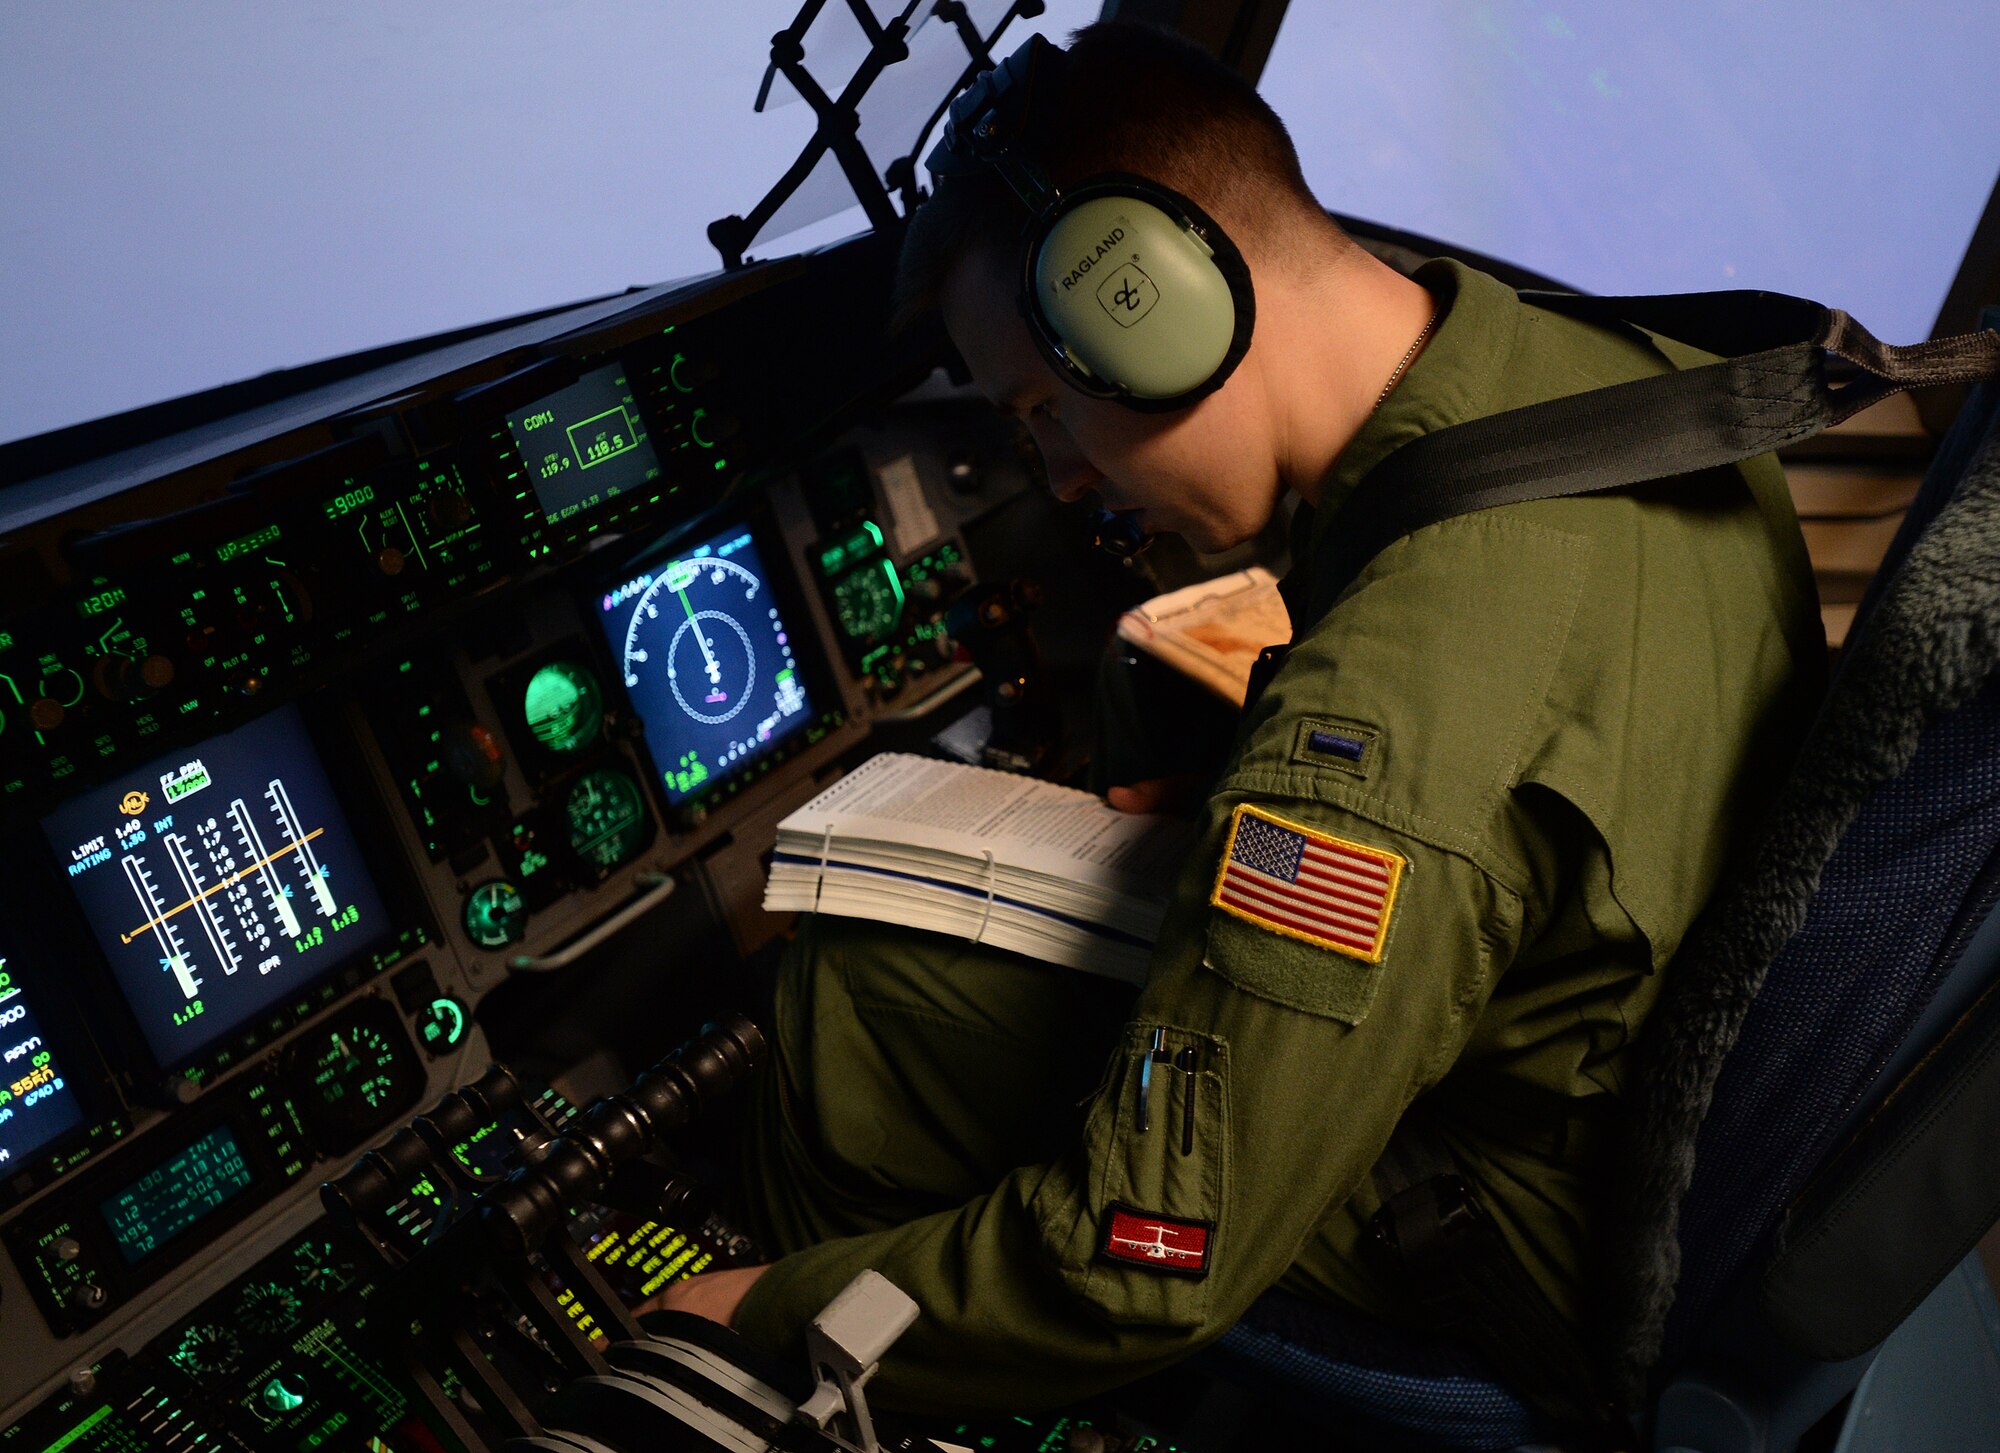 1st Lt. Taylor Ragland, 535th Airlift Squadron pilot, runs through a checklist during a simulated in-air emergency in a C-17 Globemaster III simulator during a quarterly training session at Joint Base Pearl Harbor-Hickam, Hawaii, Feb. 18, 2014. Ragland is a C-17 pilot, and trains extensively using the simulator, designed to give pilots a realistic feel for in-air tactical and emergency operations. (U.S. Air Force photo/Staff Sgt. Alexander Martinez)